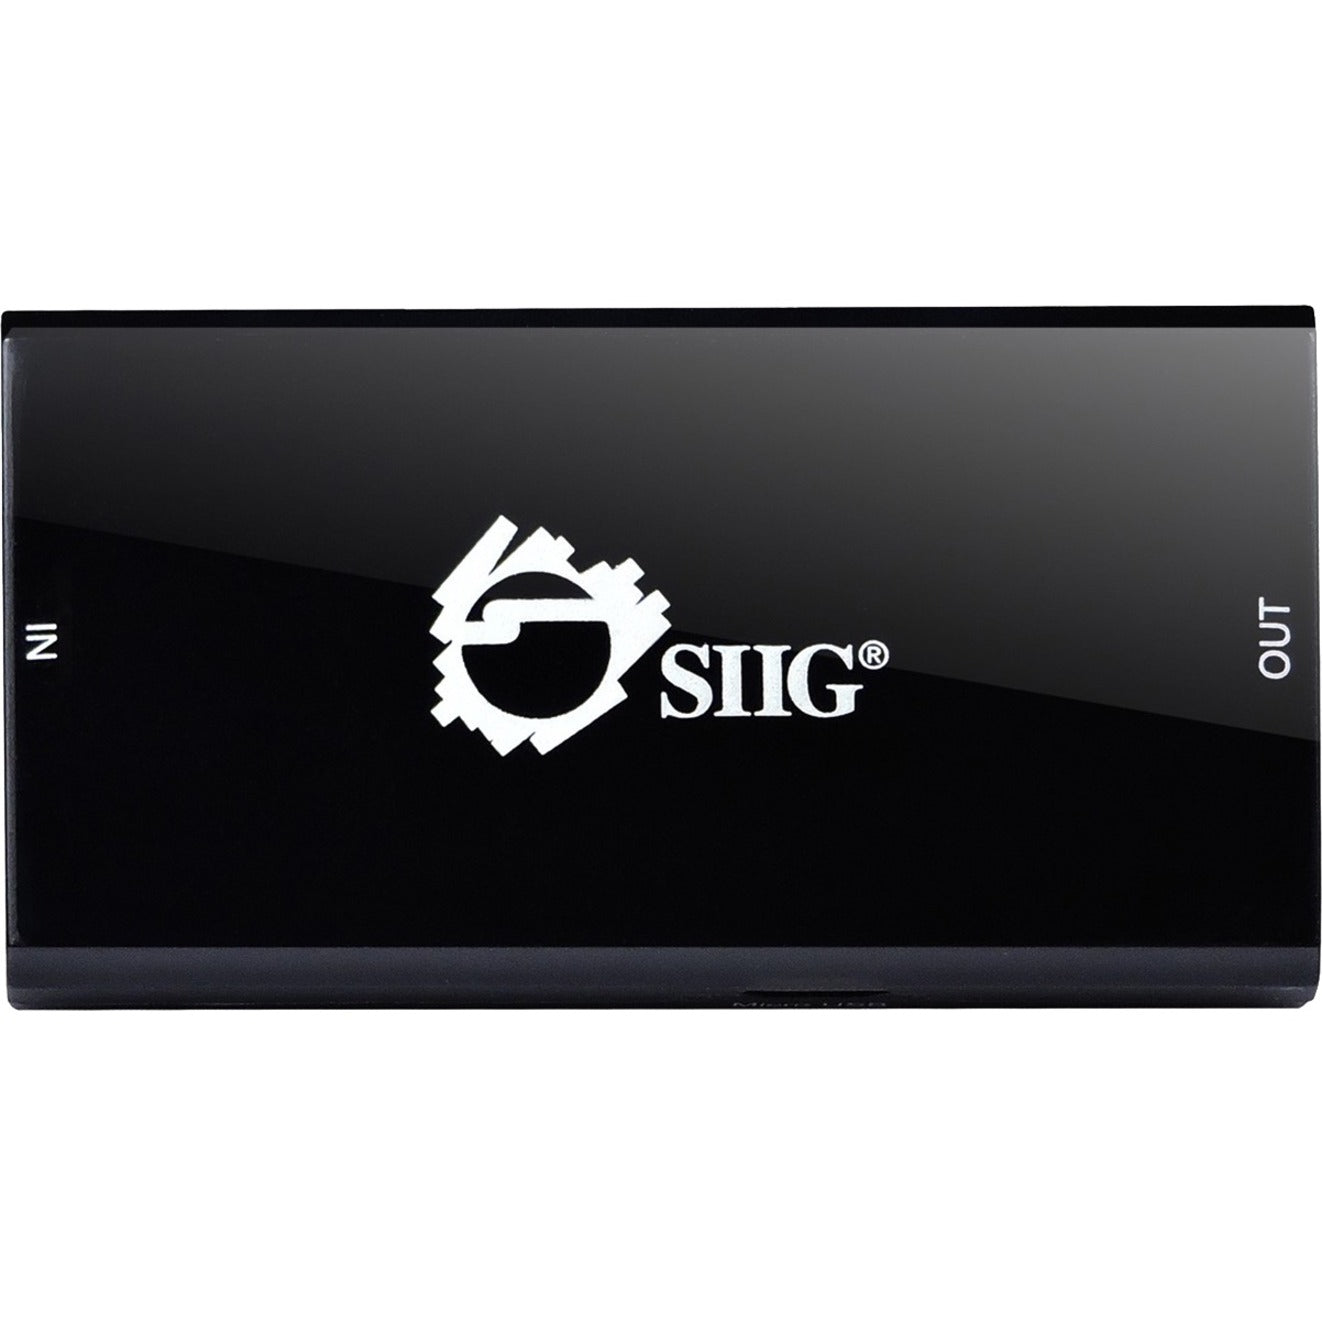 SIIG CE-H22J14-S1 HDMI 2.0 Repeater - 4Kx2K 60Hz, USB, RoHS Certified